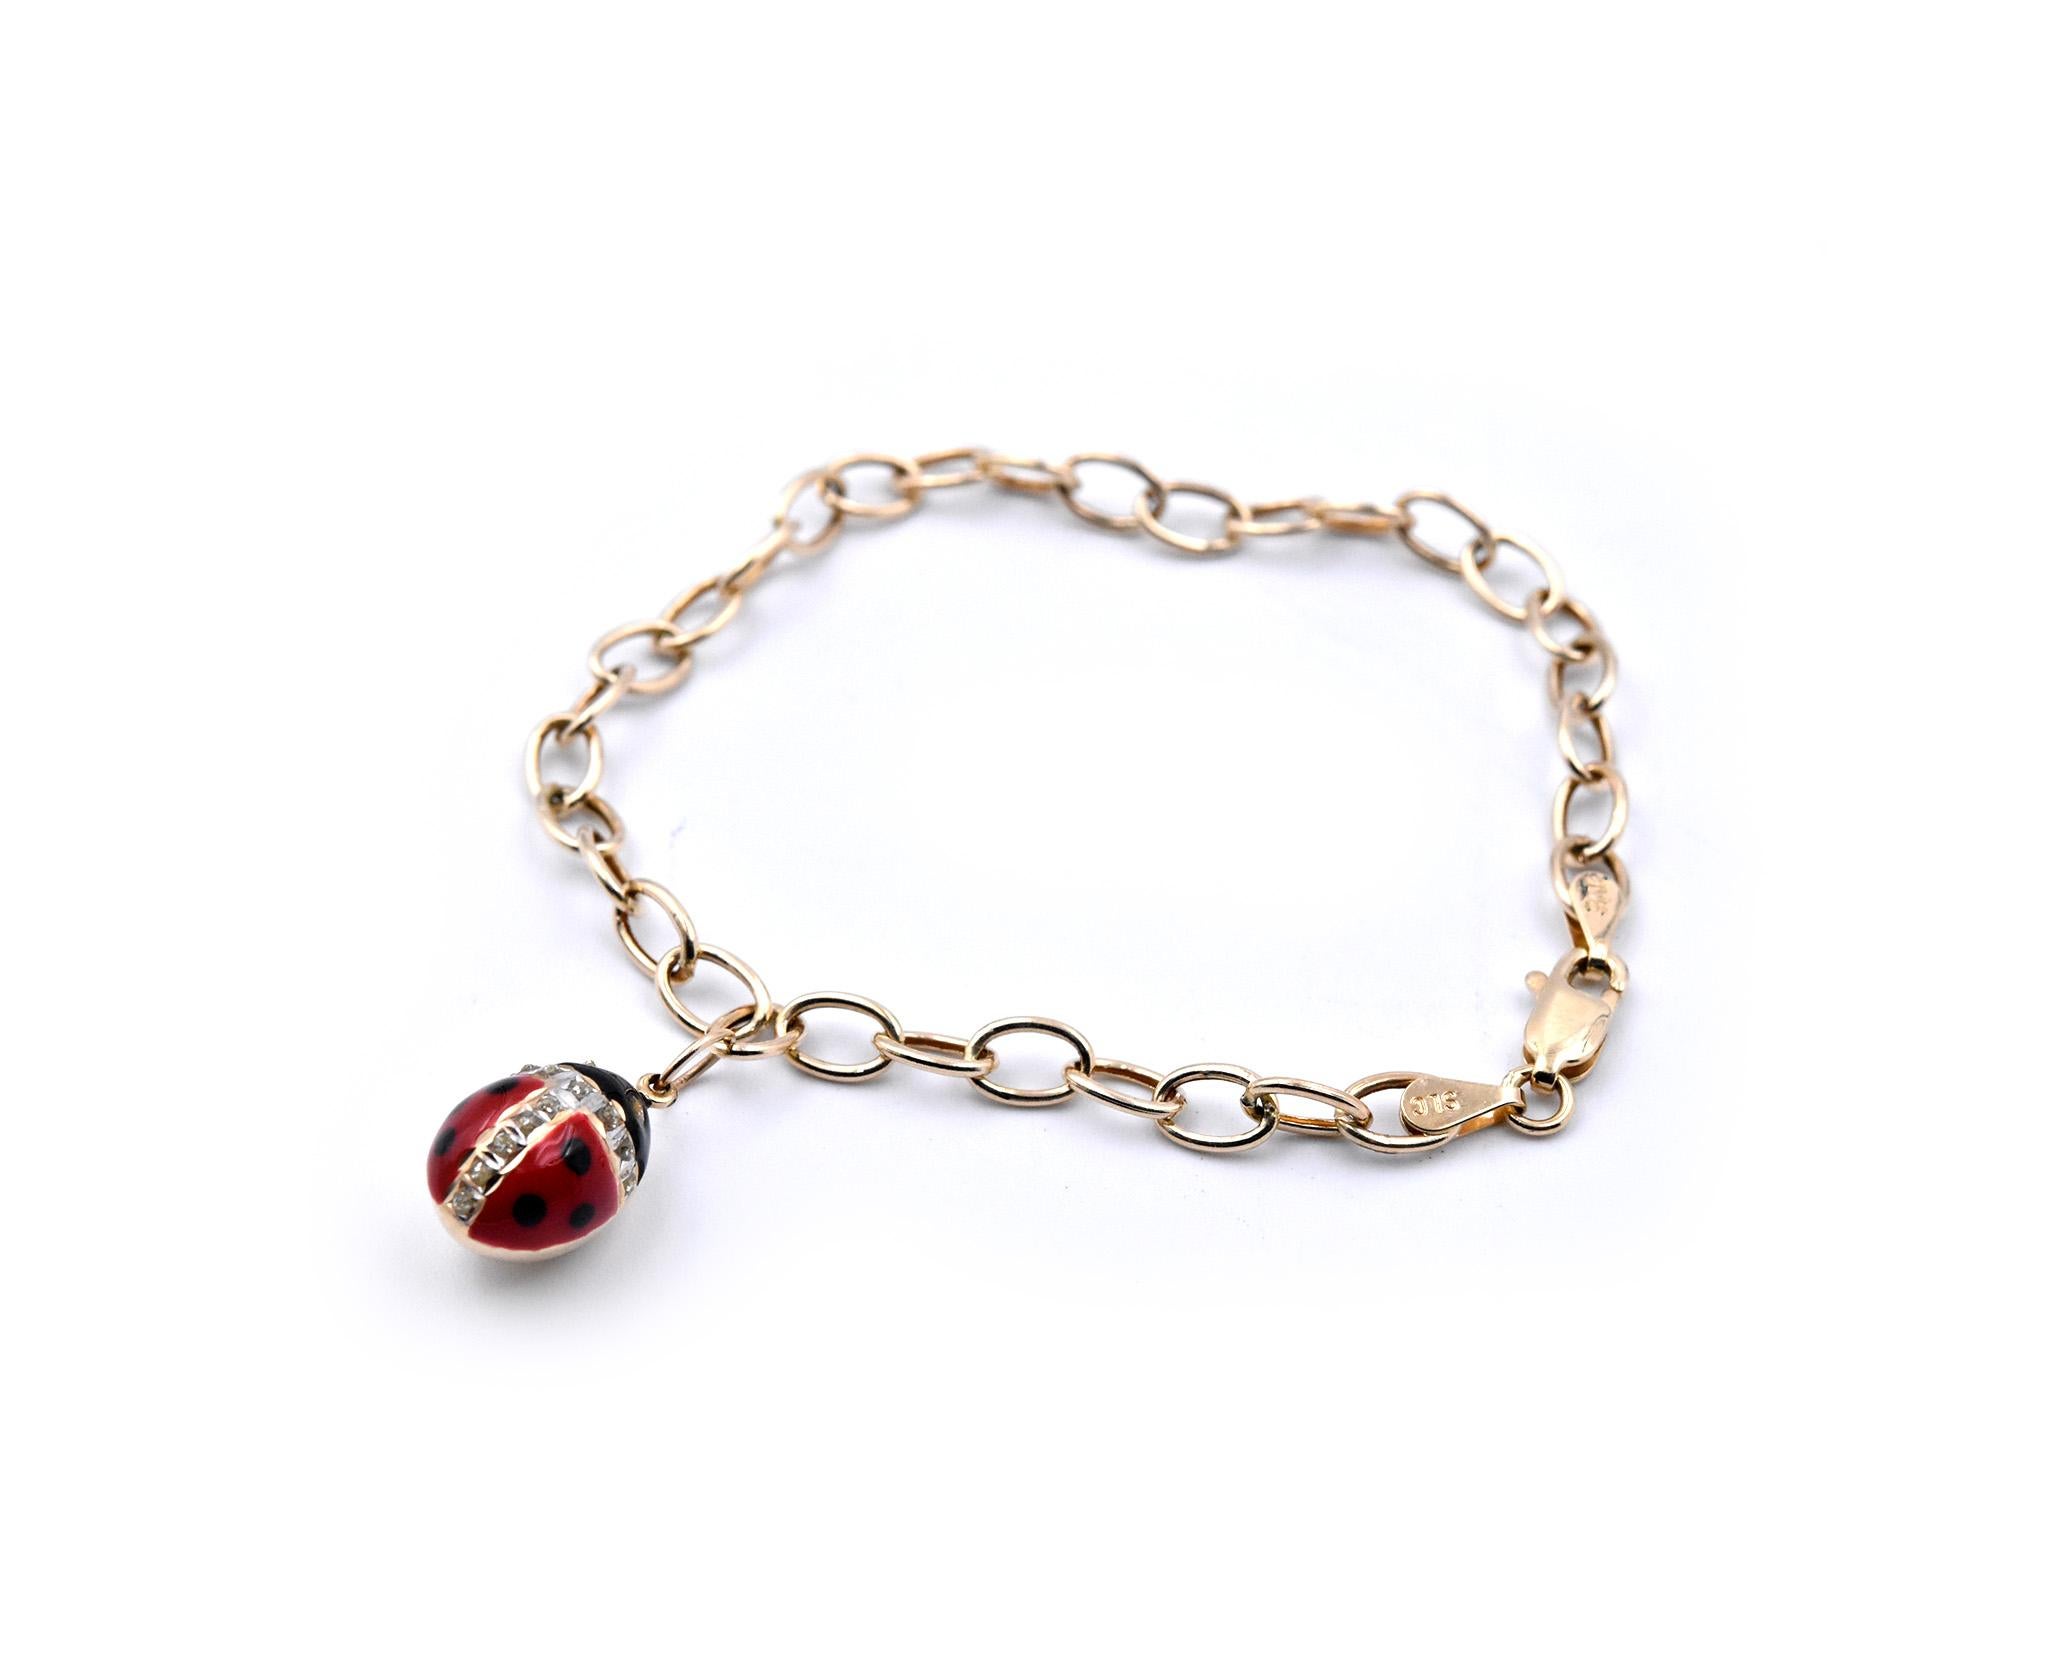 Designer: custom design 
Material: 14k yellow gold
Dimensions: bracelet measures 7 inches in length and ladybug measures 12.95mm long
Weight: 2.47 grams
